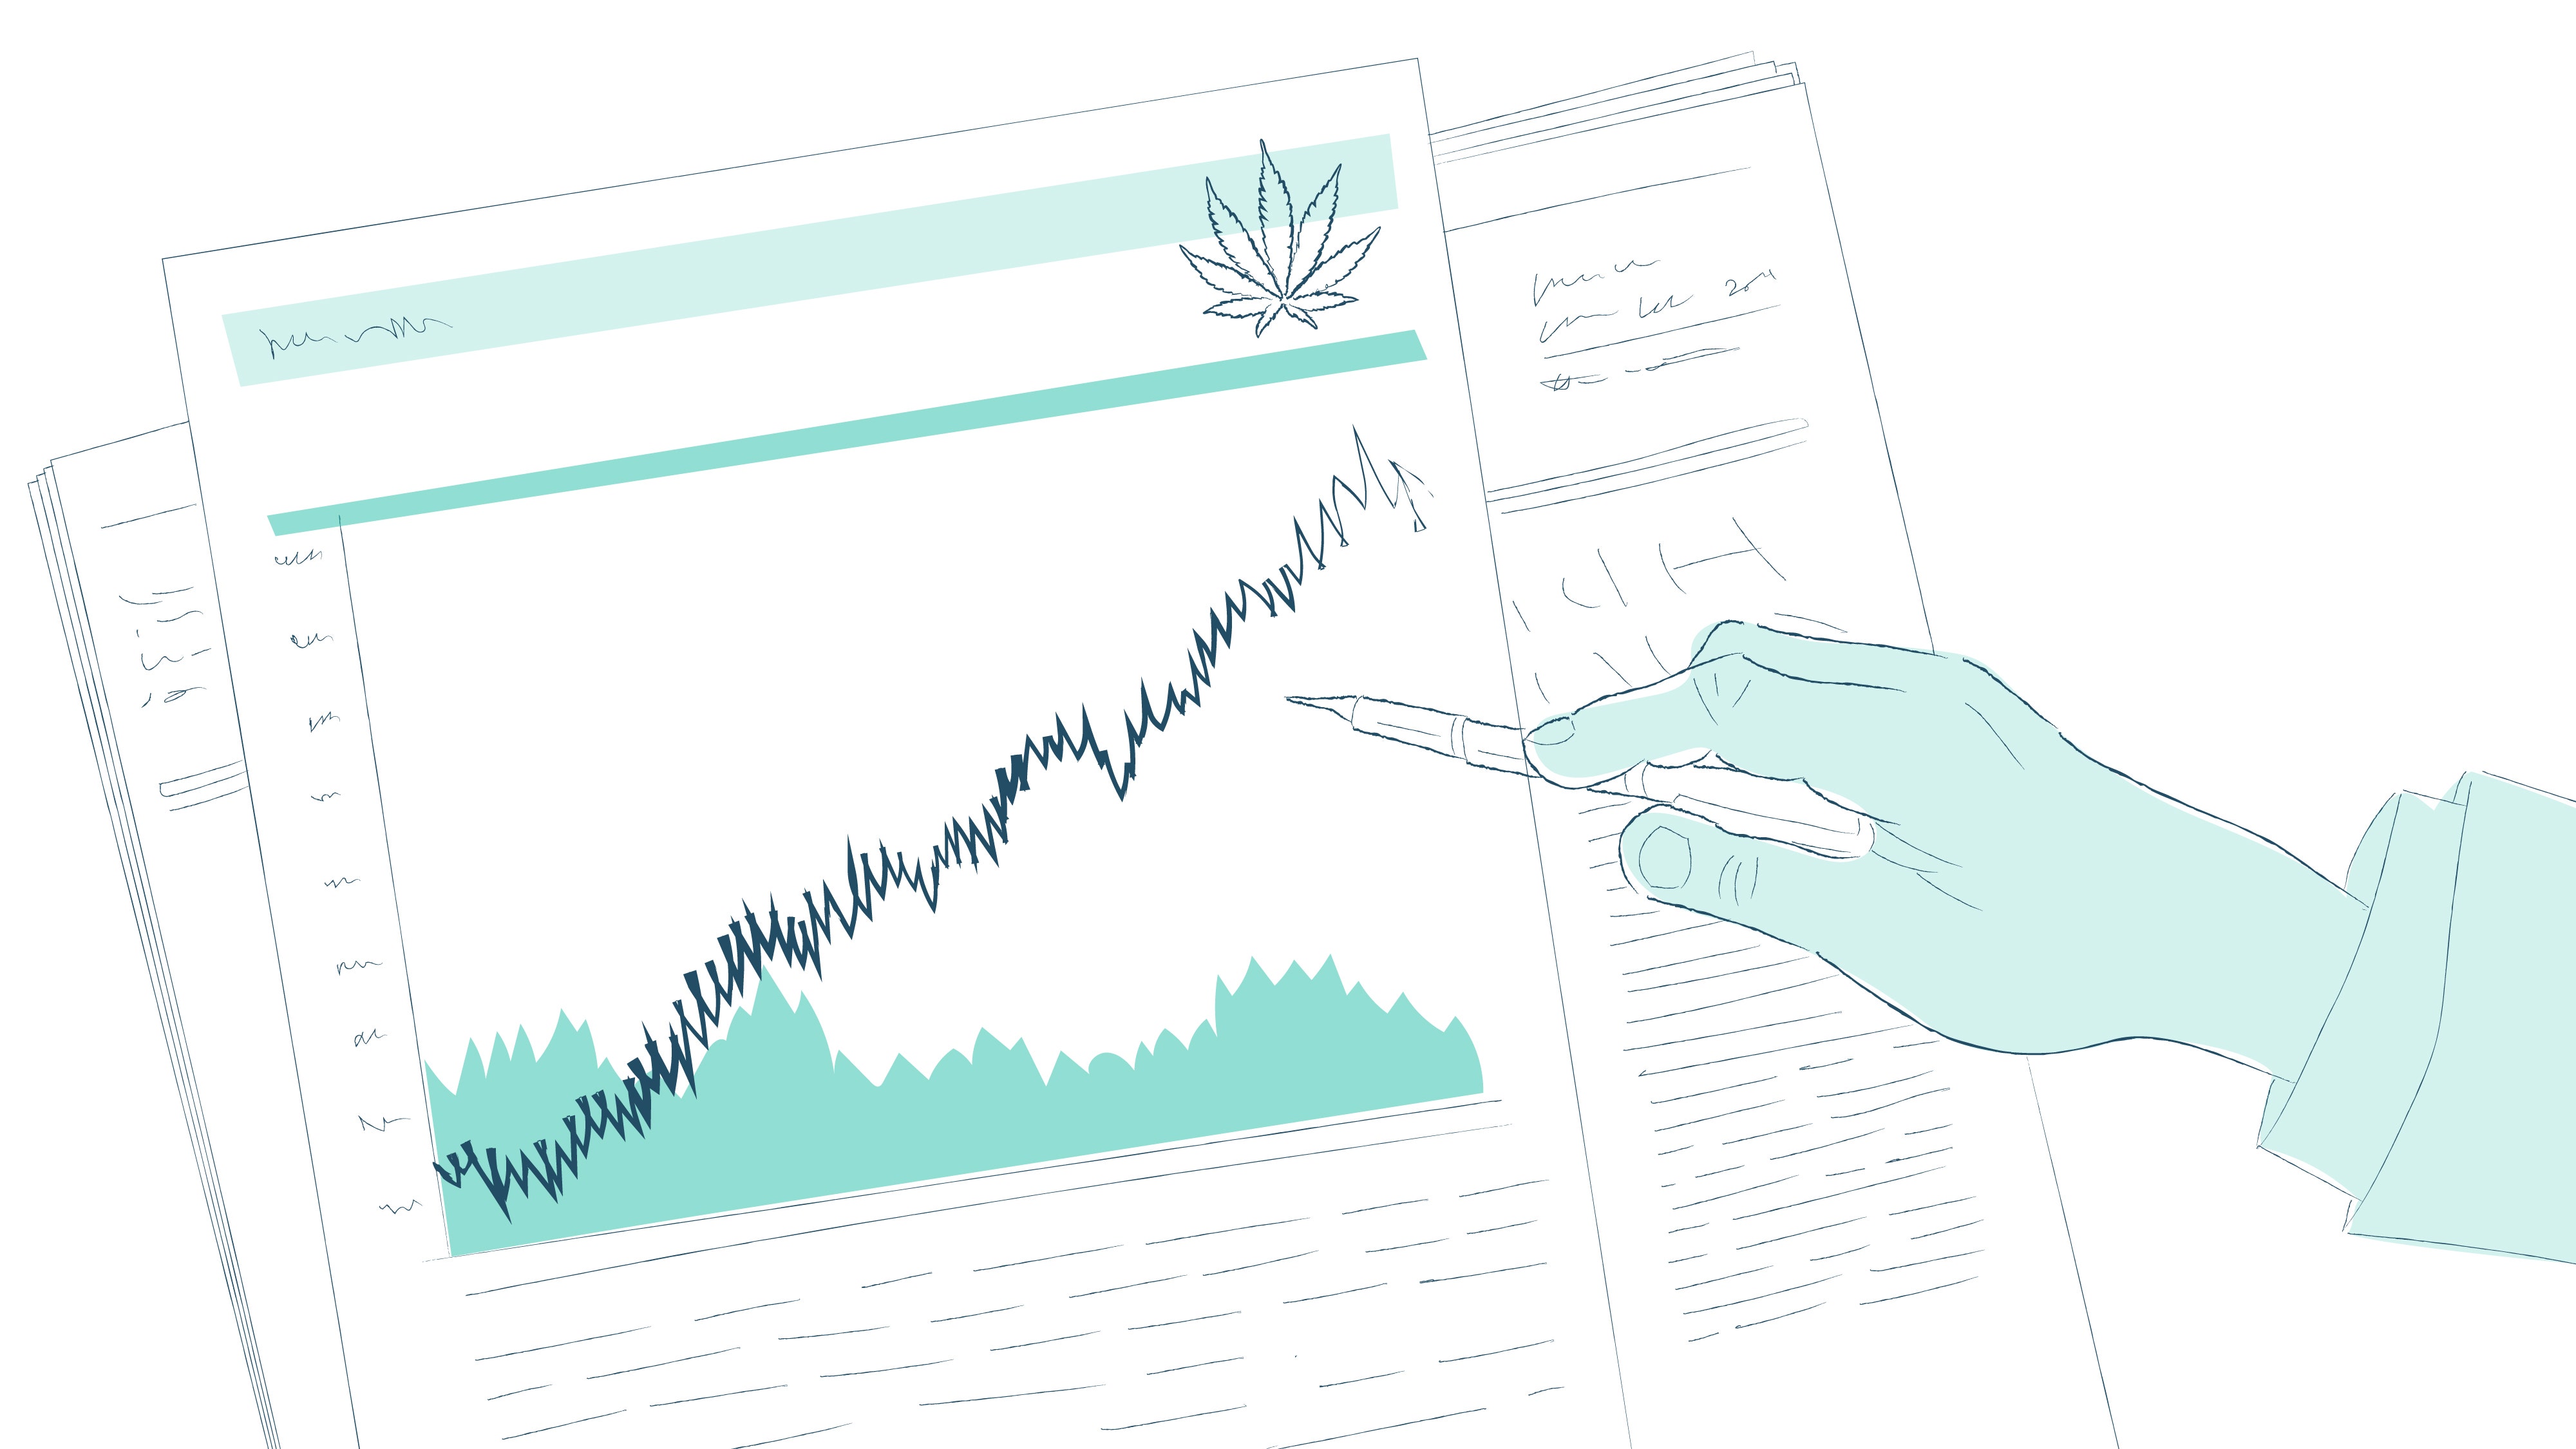 EXCLUSIVE: Managers Explain Their Cannabis ETFs: CNBS, With Tim Seymour